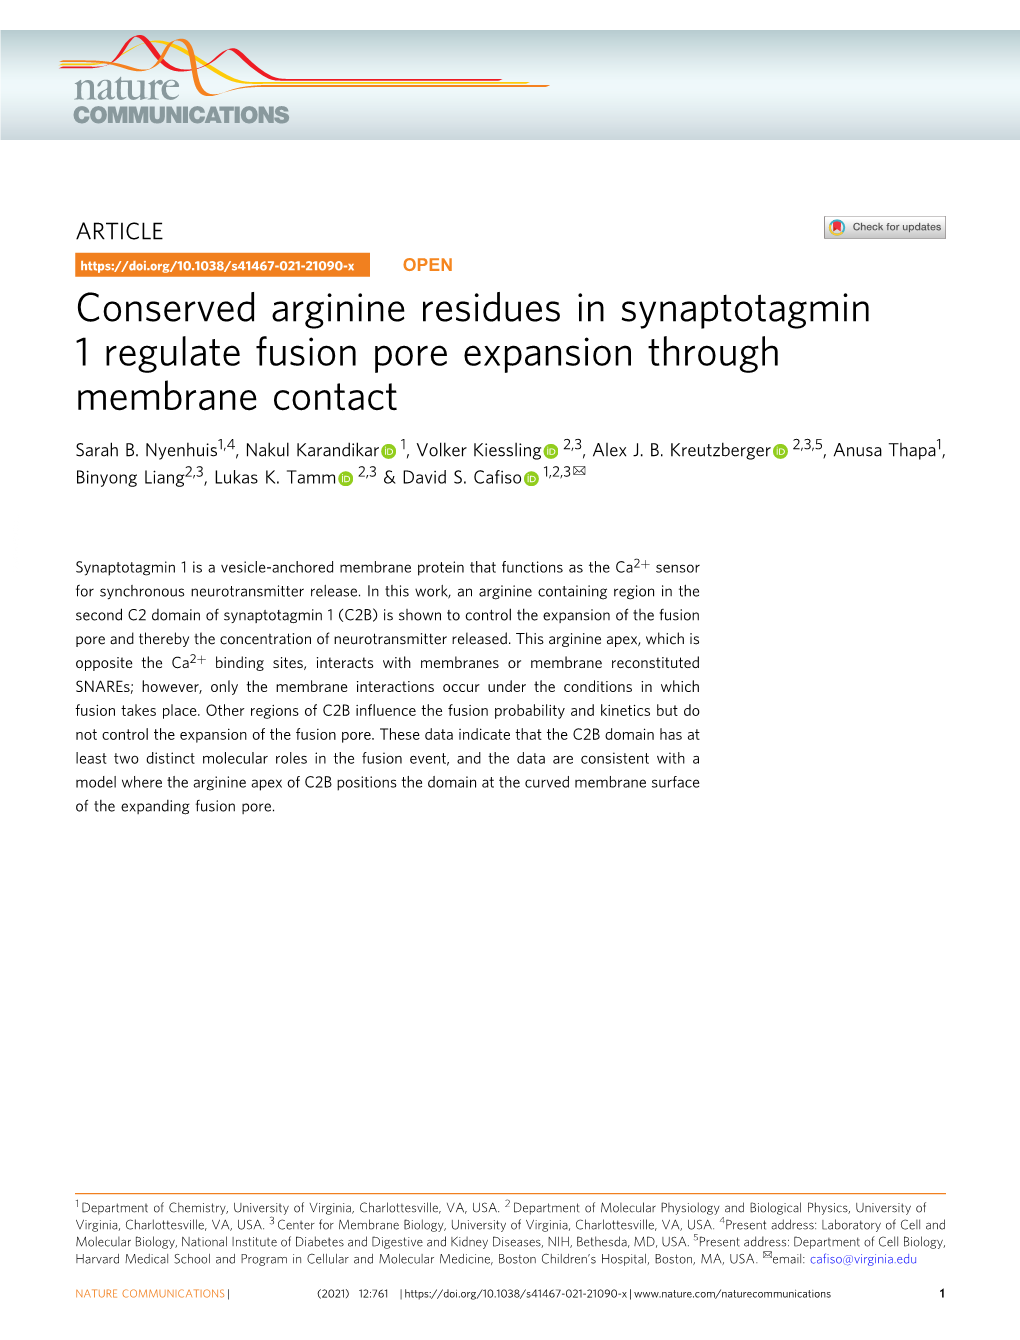 Conserved Arginine Residues in Synaptotagmin 1 Regulate Fusion Pore Expansion Through Membrane Contact